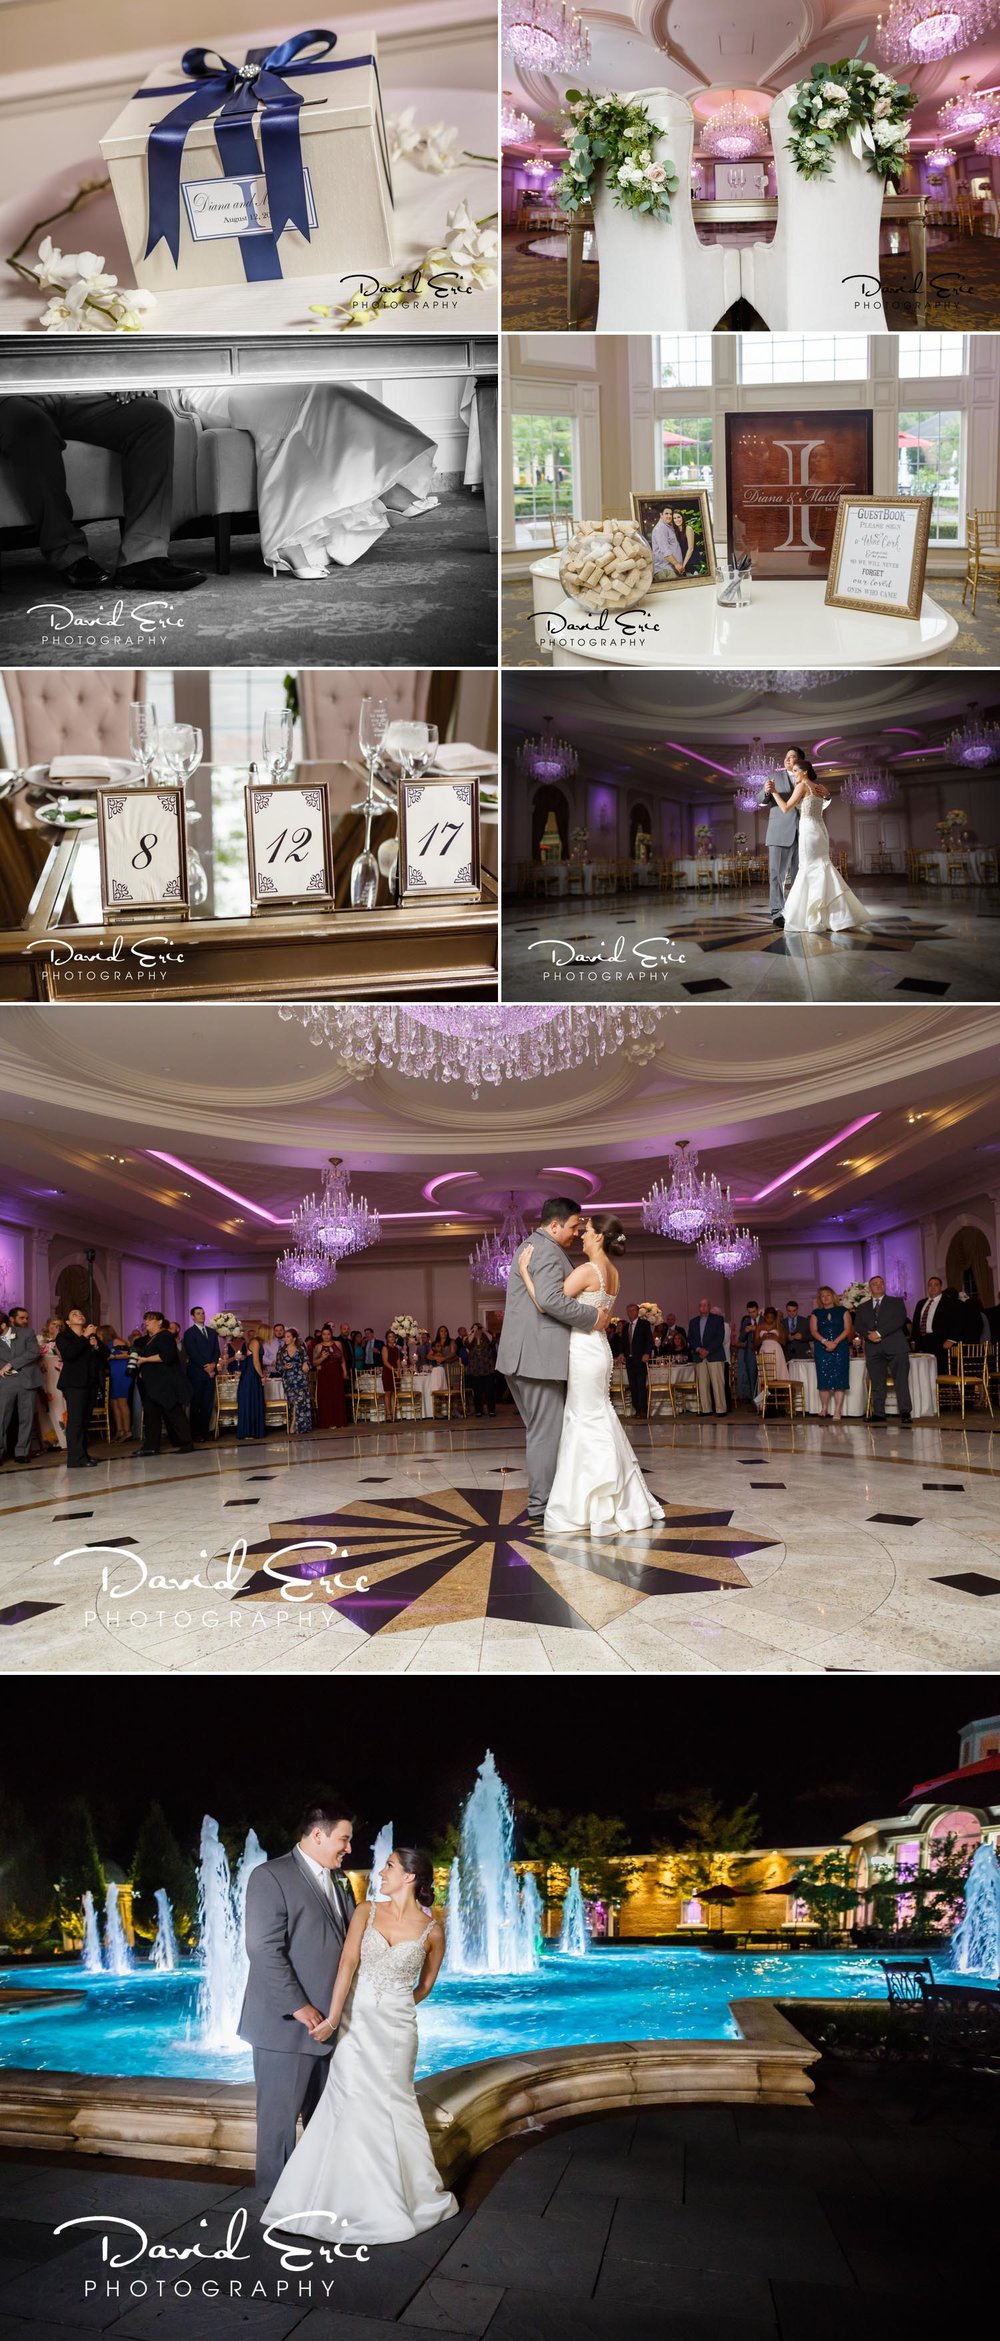  The Bristol Room ballroom, complete with palladium windows, marble dance floor, fireplace, crystal chandeliers and gold chiavari chairs creates an atmosphere of gracious hospitality. Do not trust your photos to just anyone Bergen County New Jersey wedding photographers is a husband and wife team providing high quality photography products in a family friendly and inviting atmosphere. Enjoy these photographs taken in the Bristol ballroom at the rockleigh country club rockleigh nj 